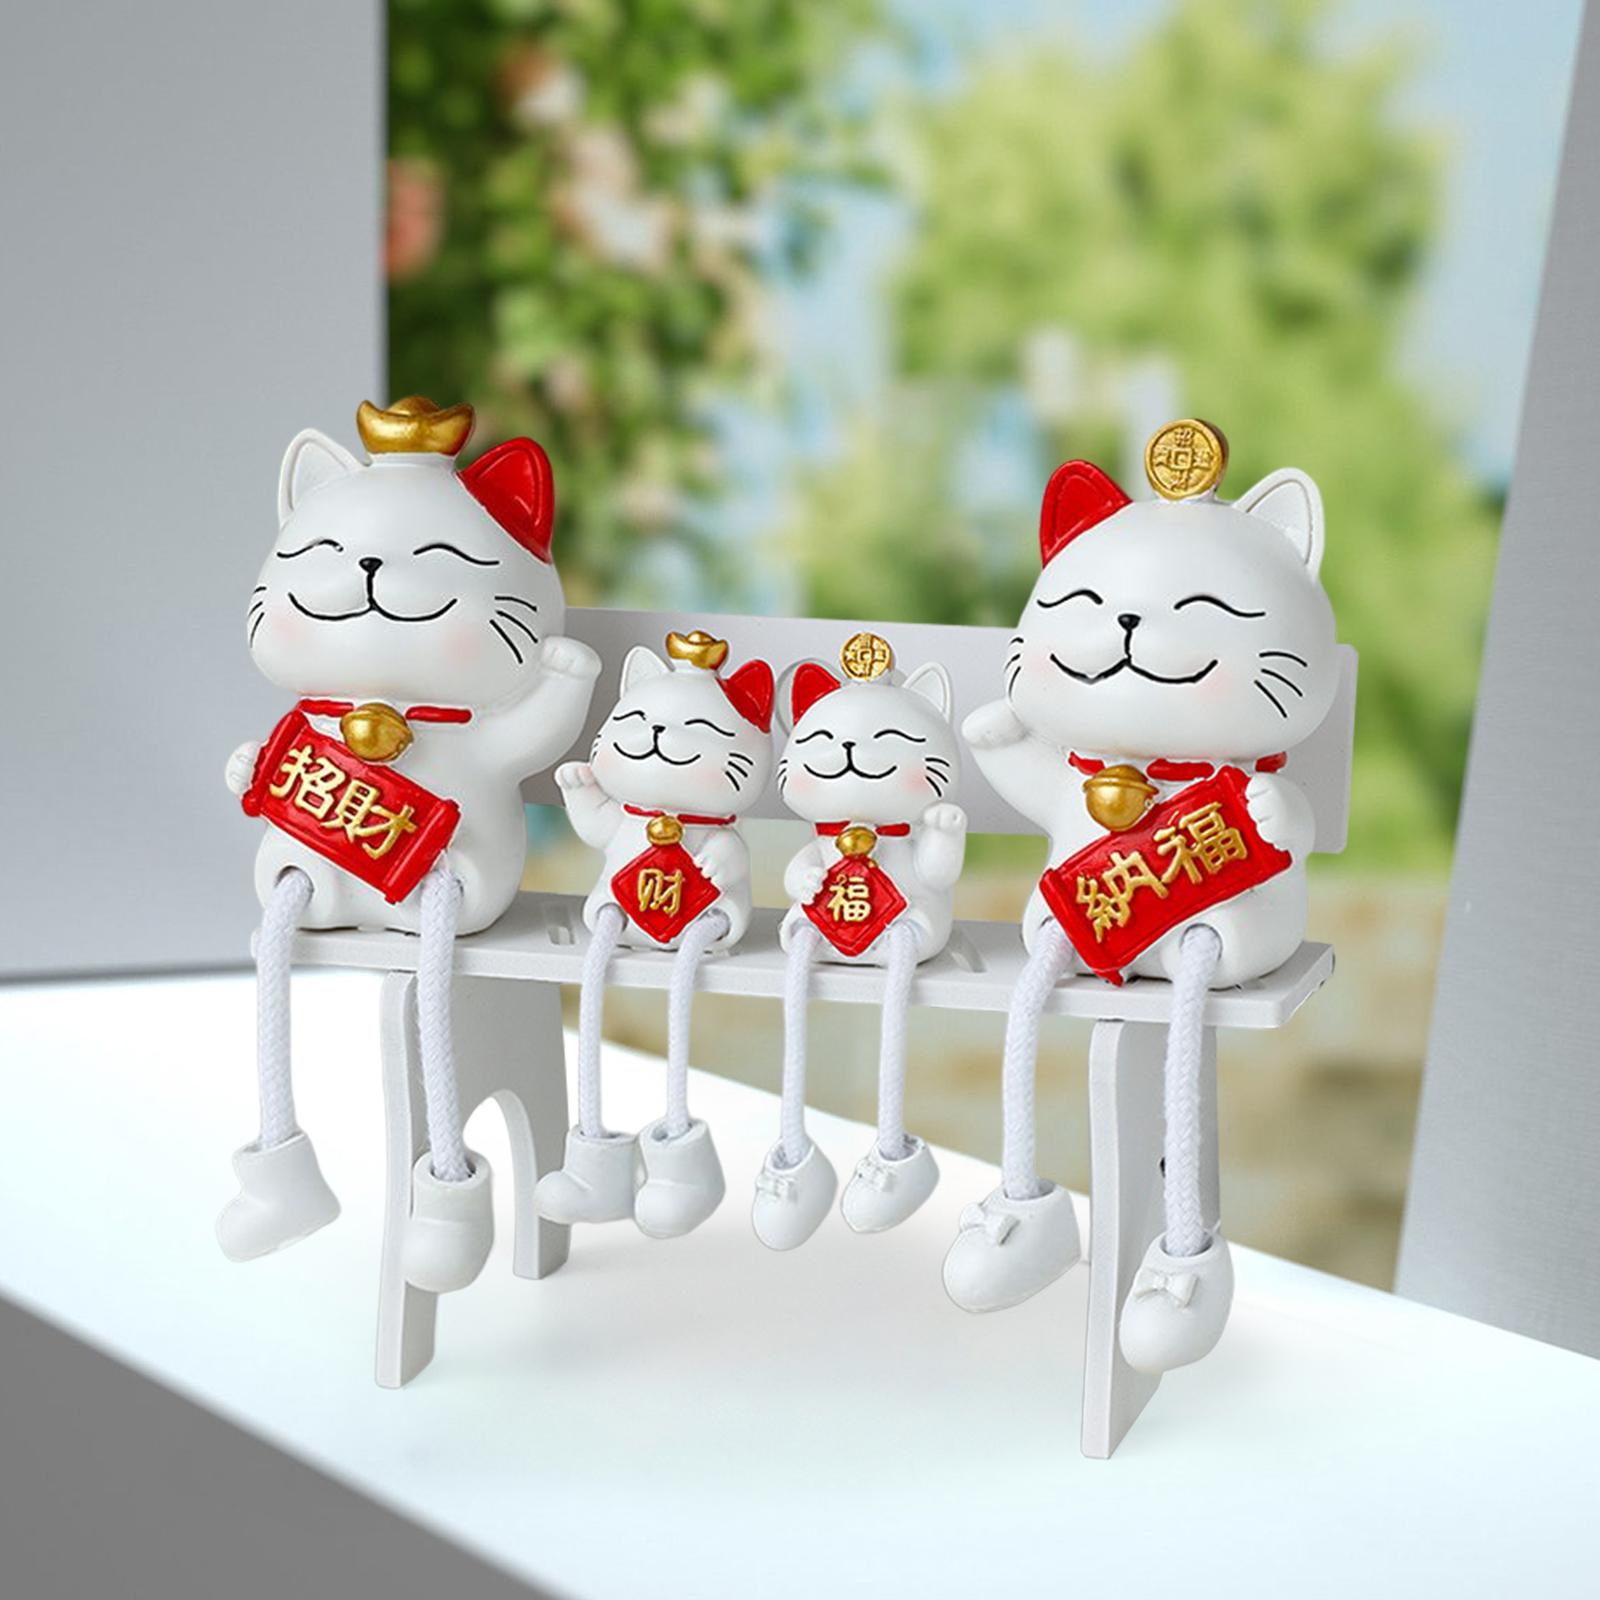 Lucky Cats Figurine Animal Statue Resin Sculpture for Living Room Decoration StyleC